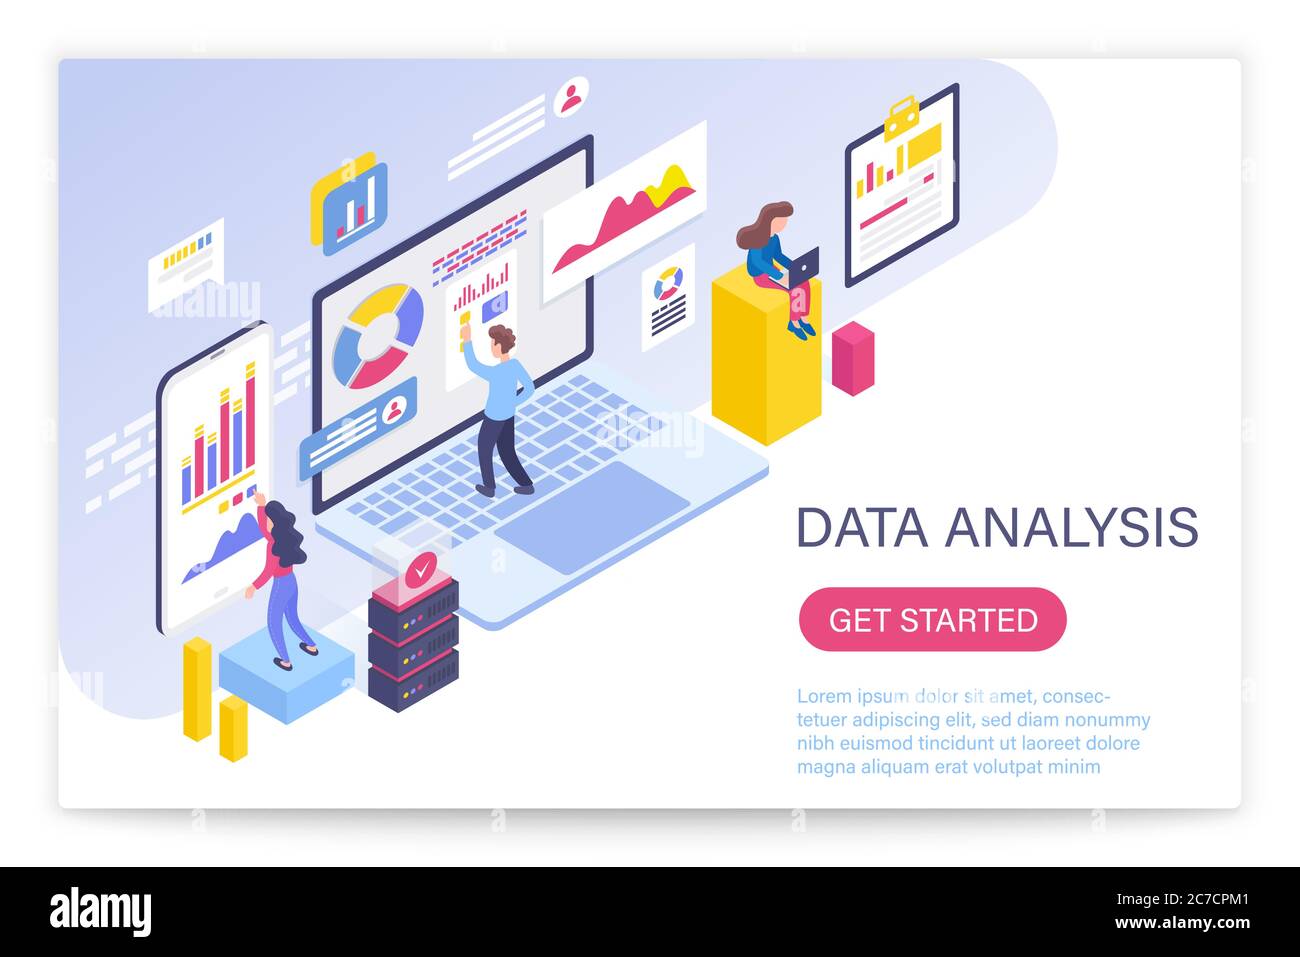 Data analysis process, big data concept 3d isometric vector illustration. People interacting with virtual screen charts and analyzing statistics Stock Vector